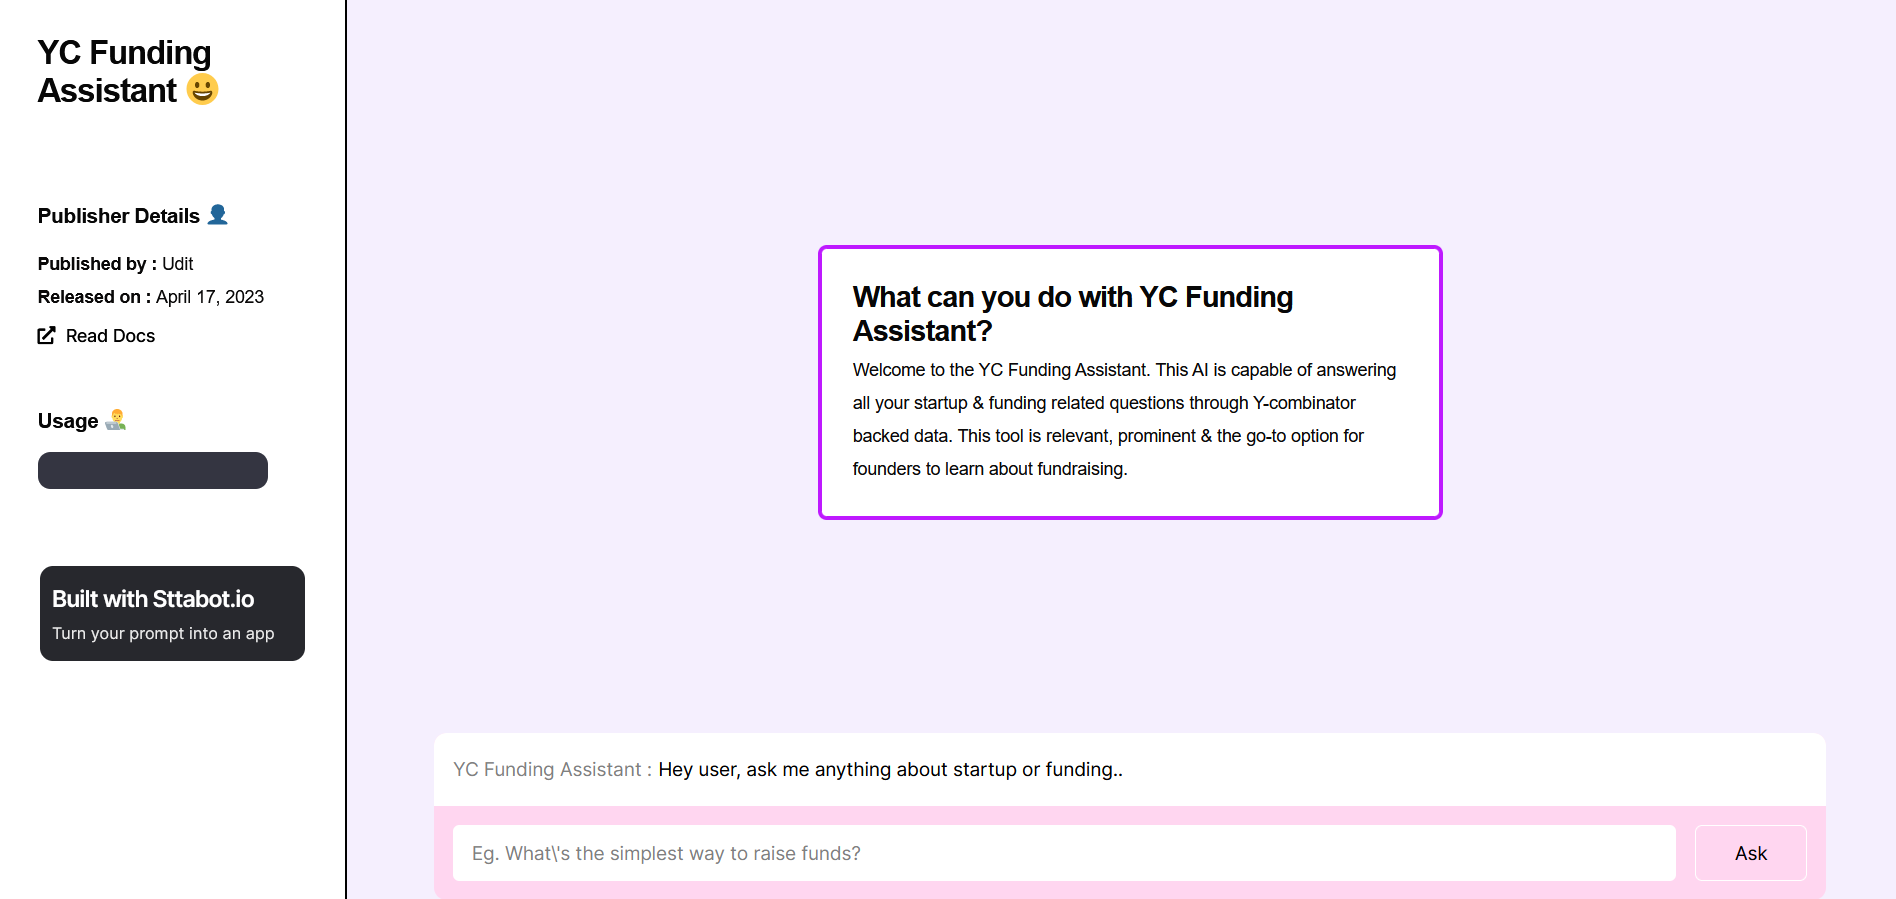 Post: YC Funding Assistant